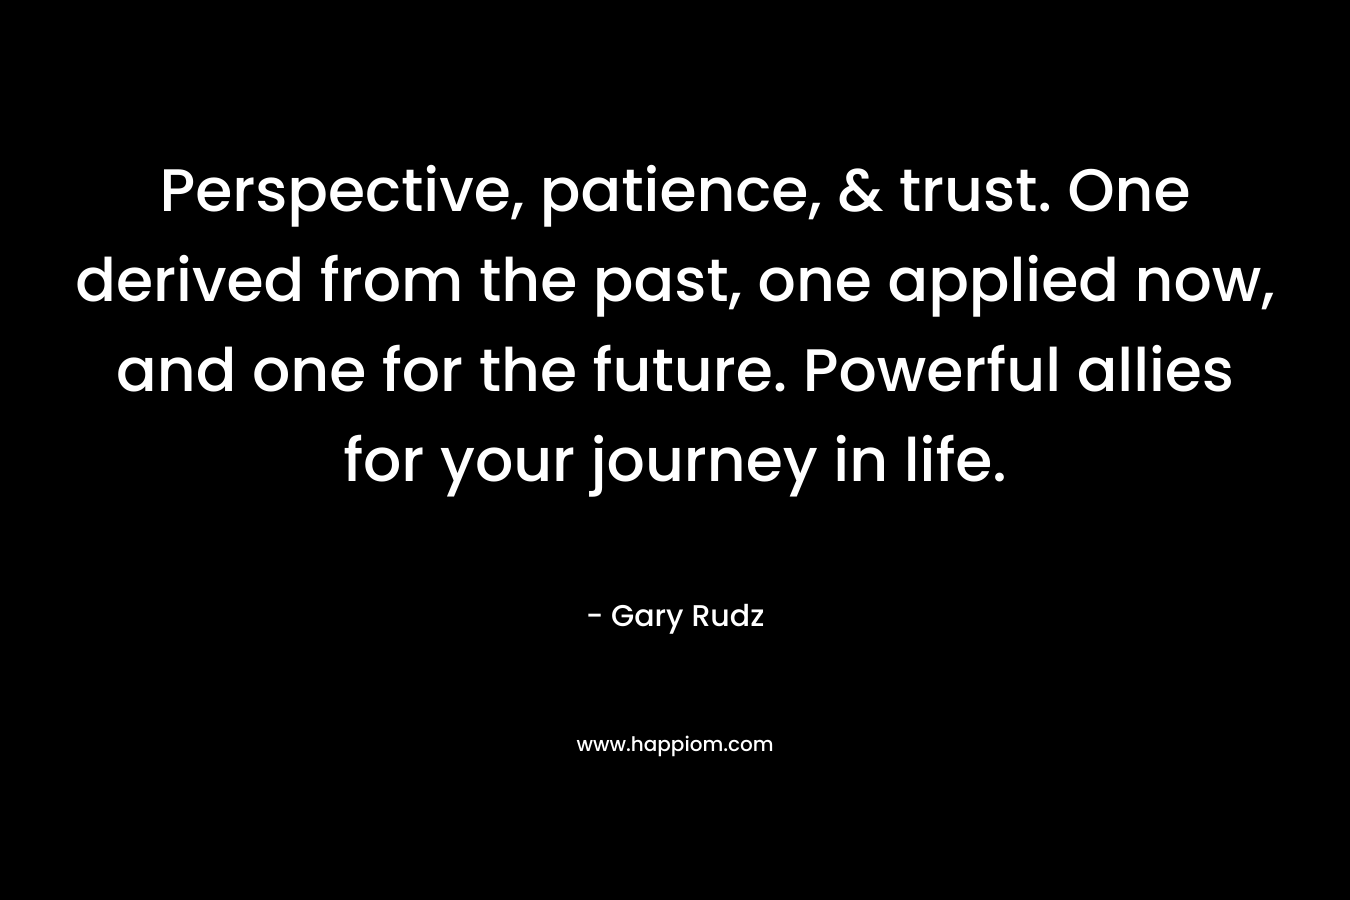 Perspective, patience, & trust. One derived from the past, one applied now, and one for the future. Powerful allies for your journey in life.